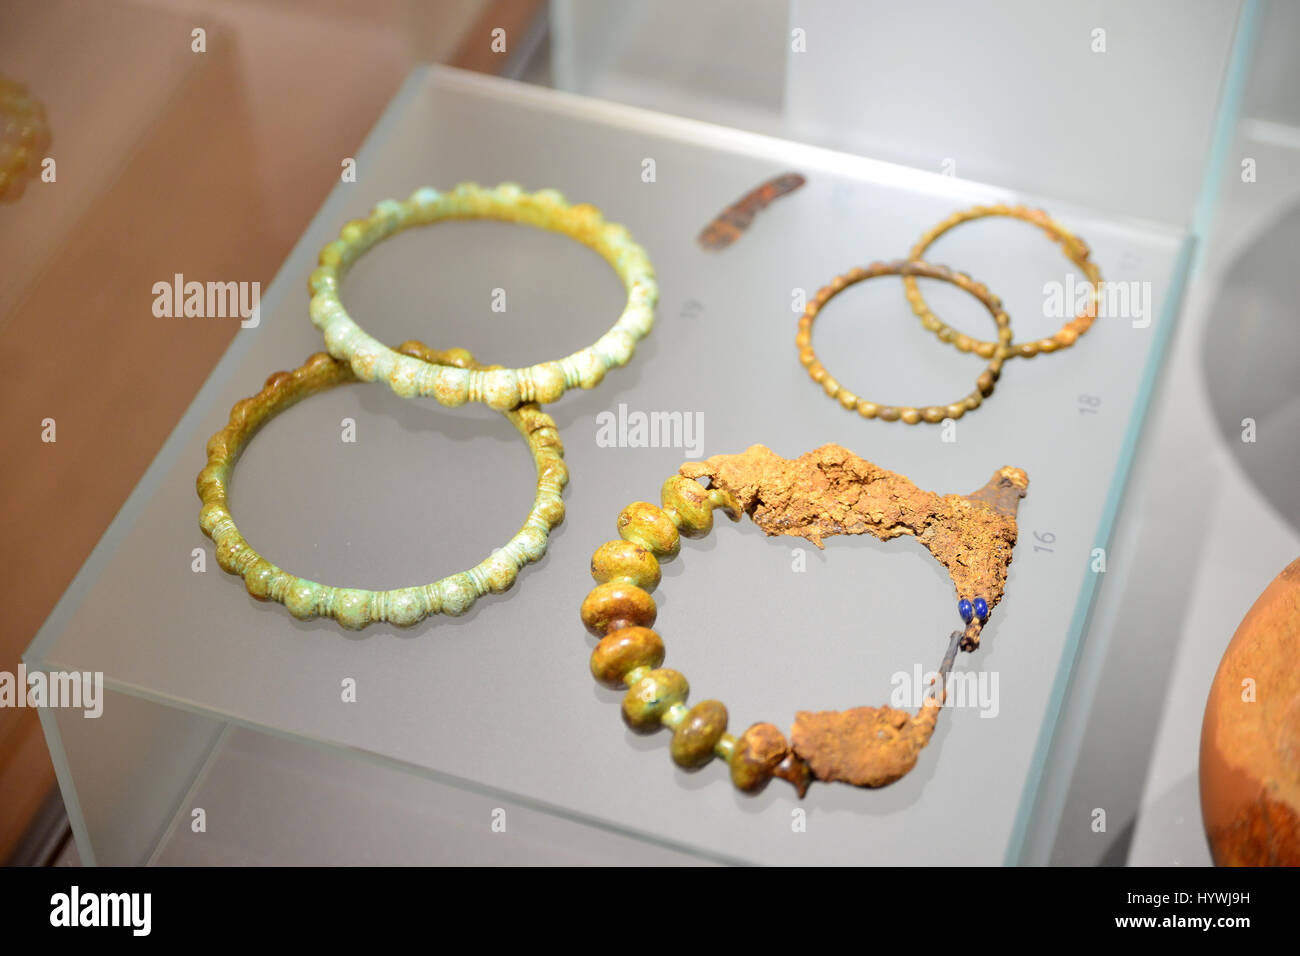 (170426) -- NOVO MESTO (SLOVENIA), April 26, 2017 (Xinhua) -- Bronze fibula, bracelets and anklets from early iron age found in Slovenia are displayed at the exhibition Amber-the Baltic jewels in Novo mesto, Slovenia, on April 26, 2017. The archaeological exhibition Amber-the Baltic jewels in Novo mesto is held here from April 20 to Sept. 30, displaying a selection of archaeological amber materials, which have been preserved by various Slovenian institutions in charge of protecting Slovenian cultural heritage. The exhibits date from the Bronze Age to antiquity. (Xinhua/Matic Stojs) Stock Photo